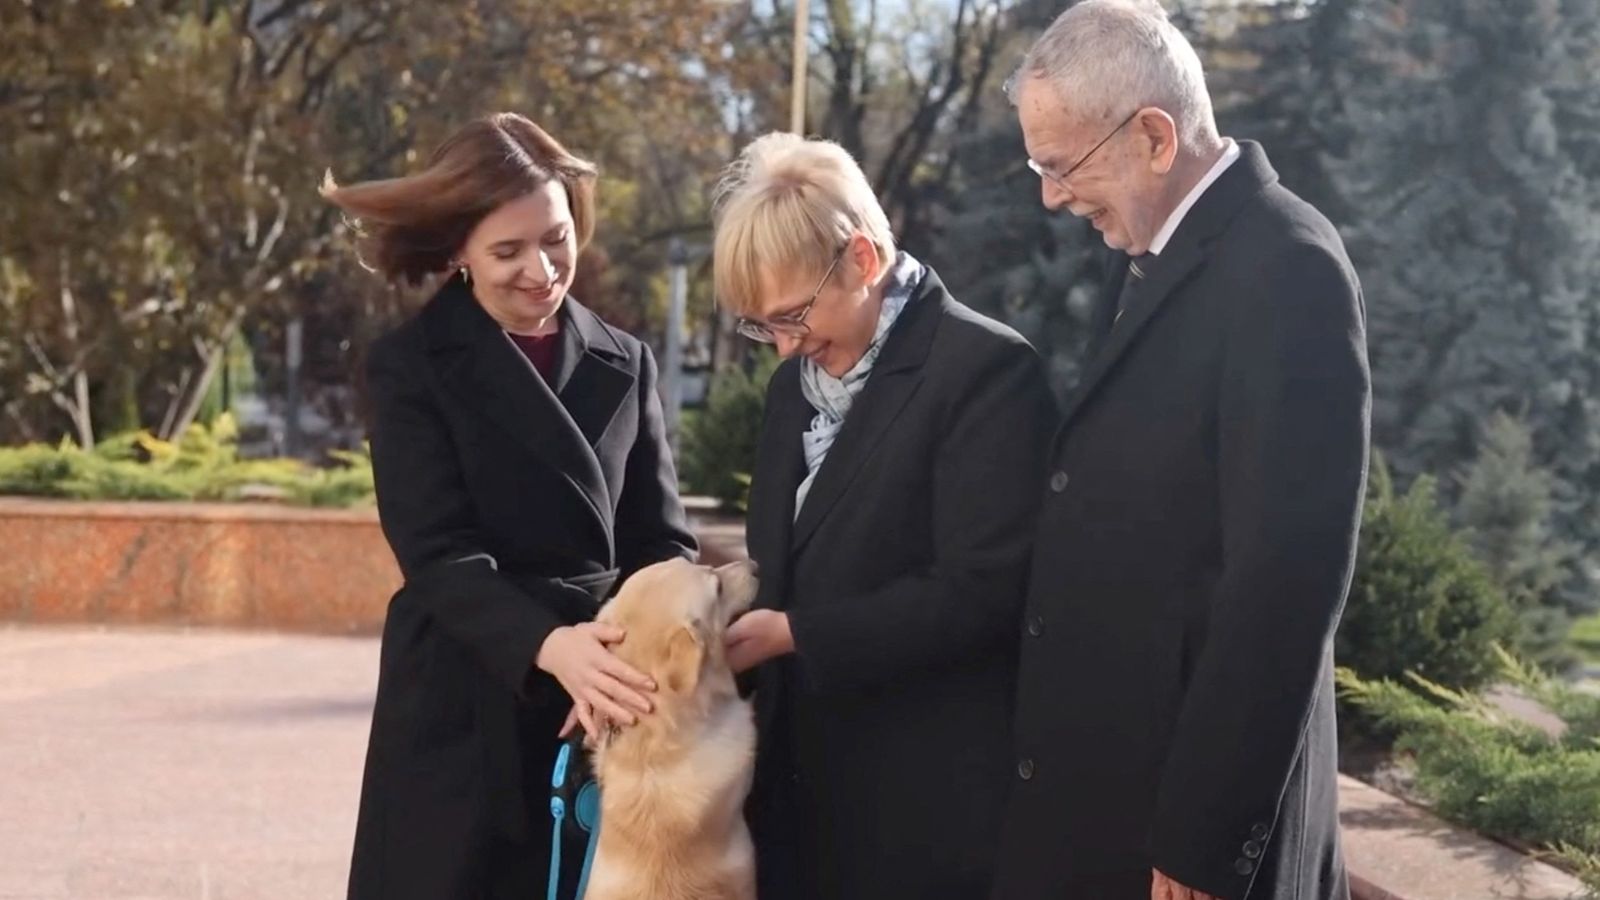 Moldova's 'first dog' bites Austrian president on the hand during official visit